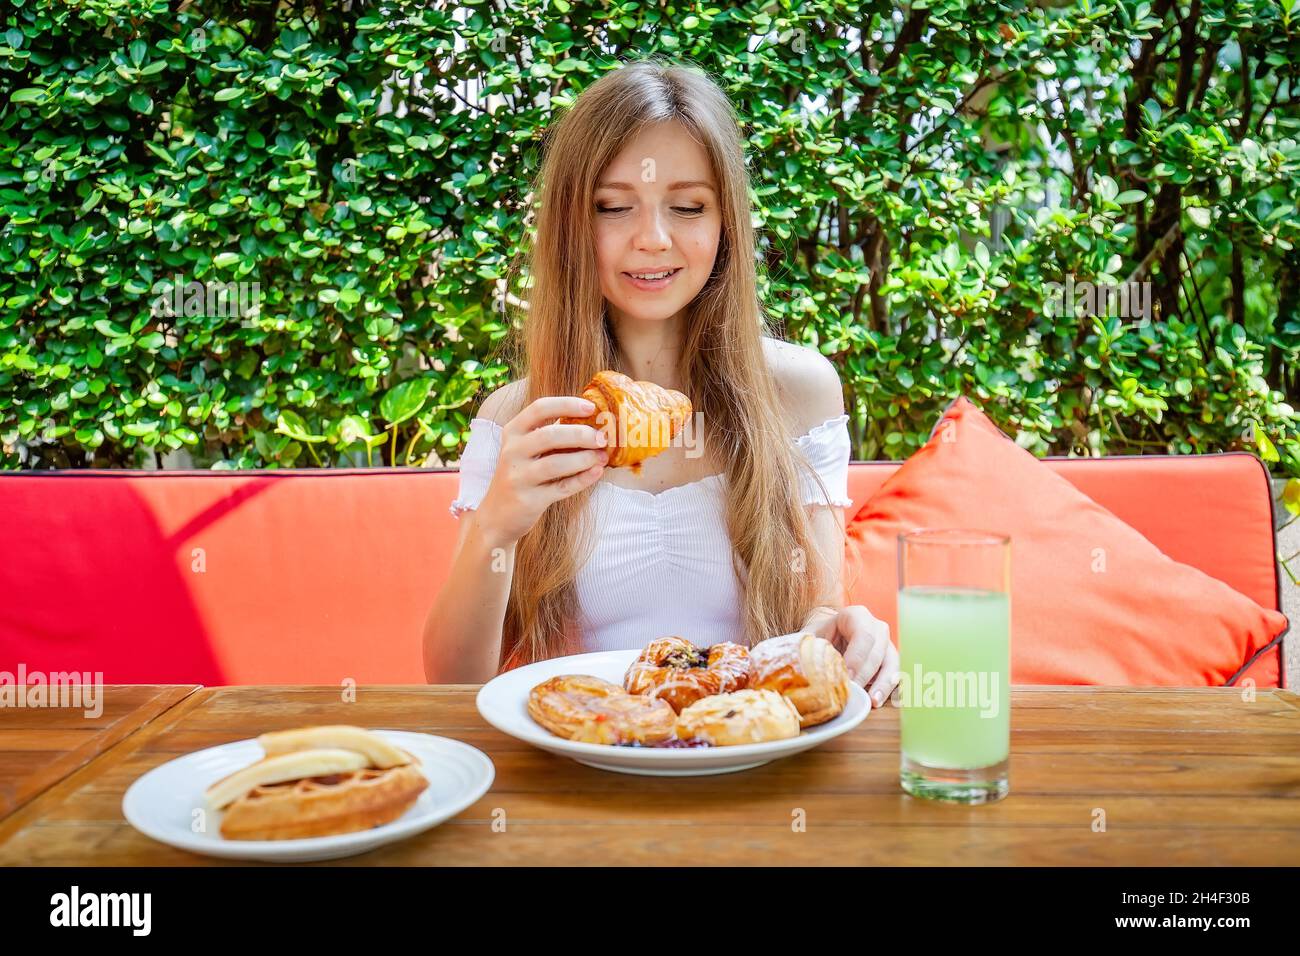 Slim Young Woman on Dieting Thinking About Eating Sweet Pastry, Bakery Stock Photo